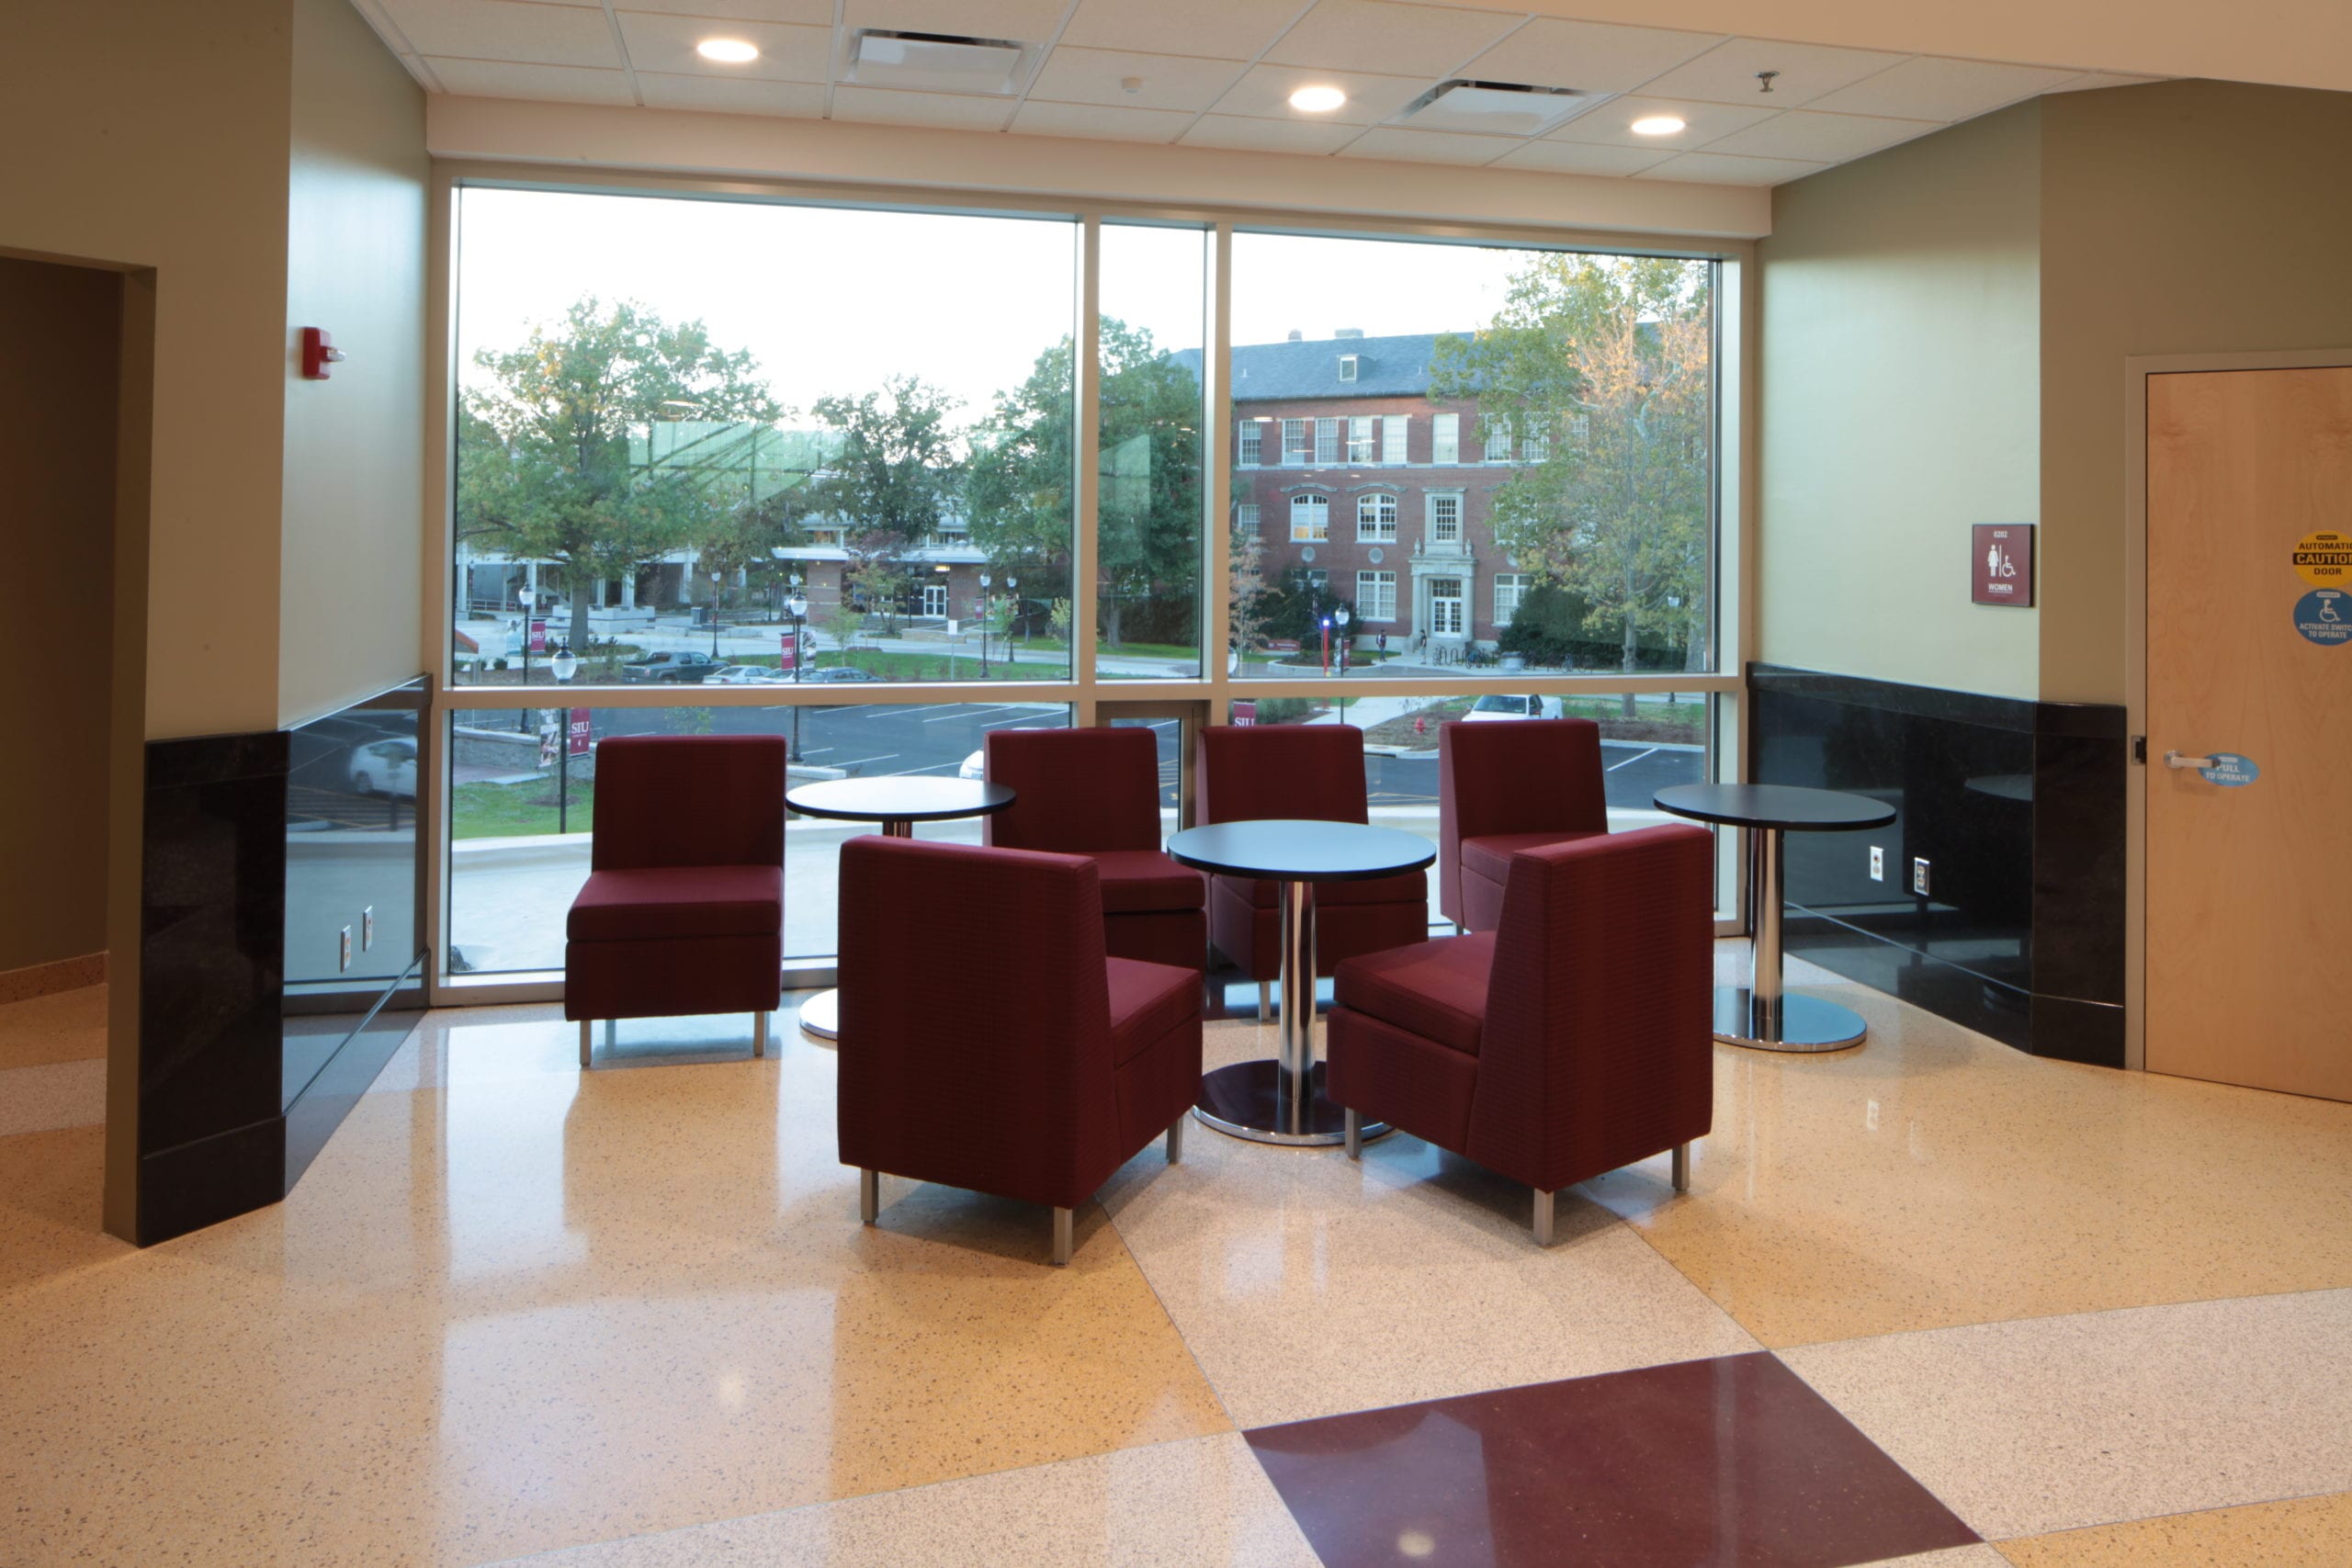 SIUC Student Services